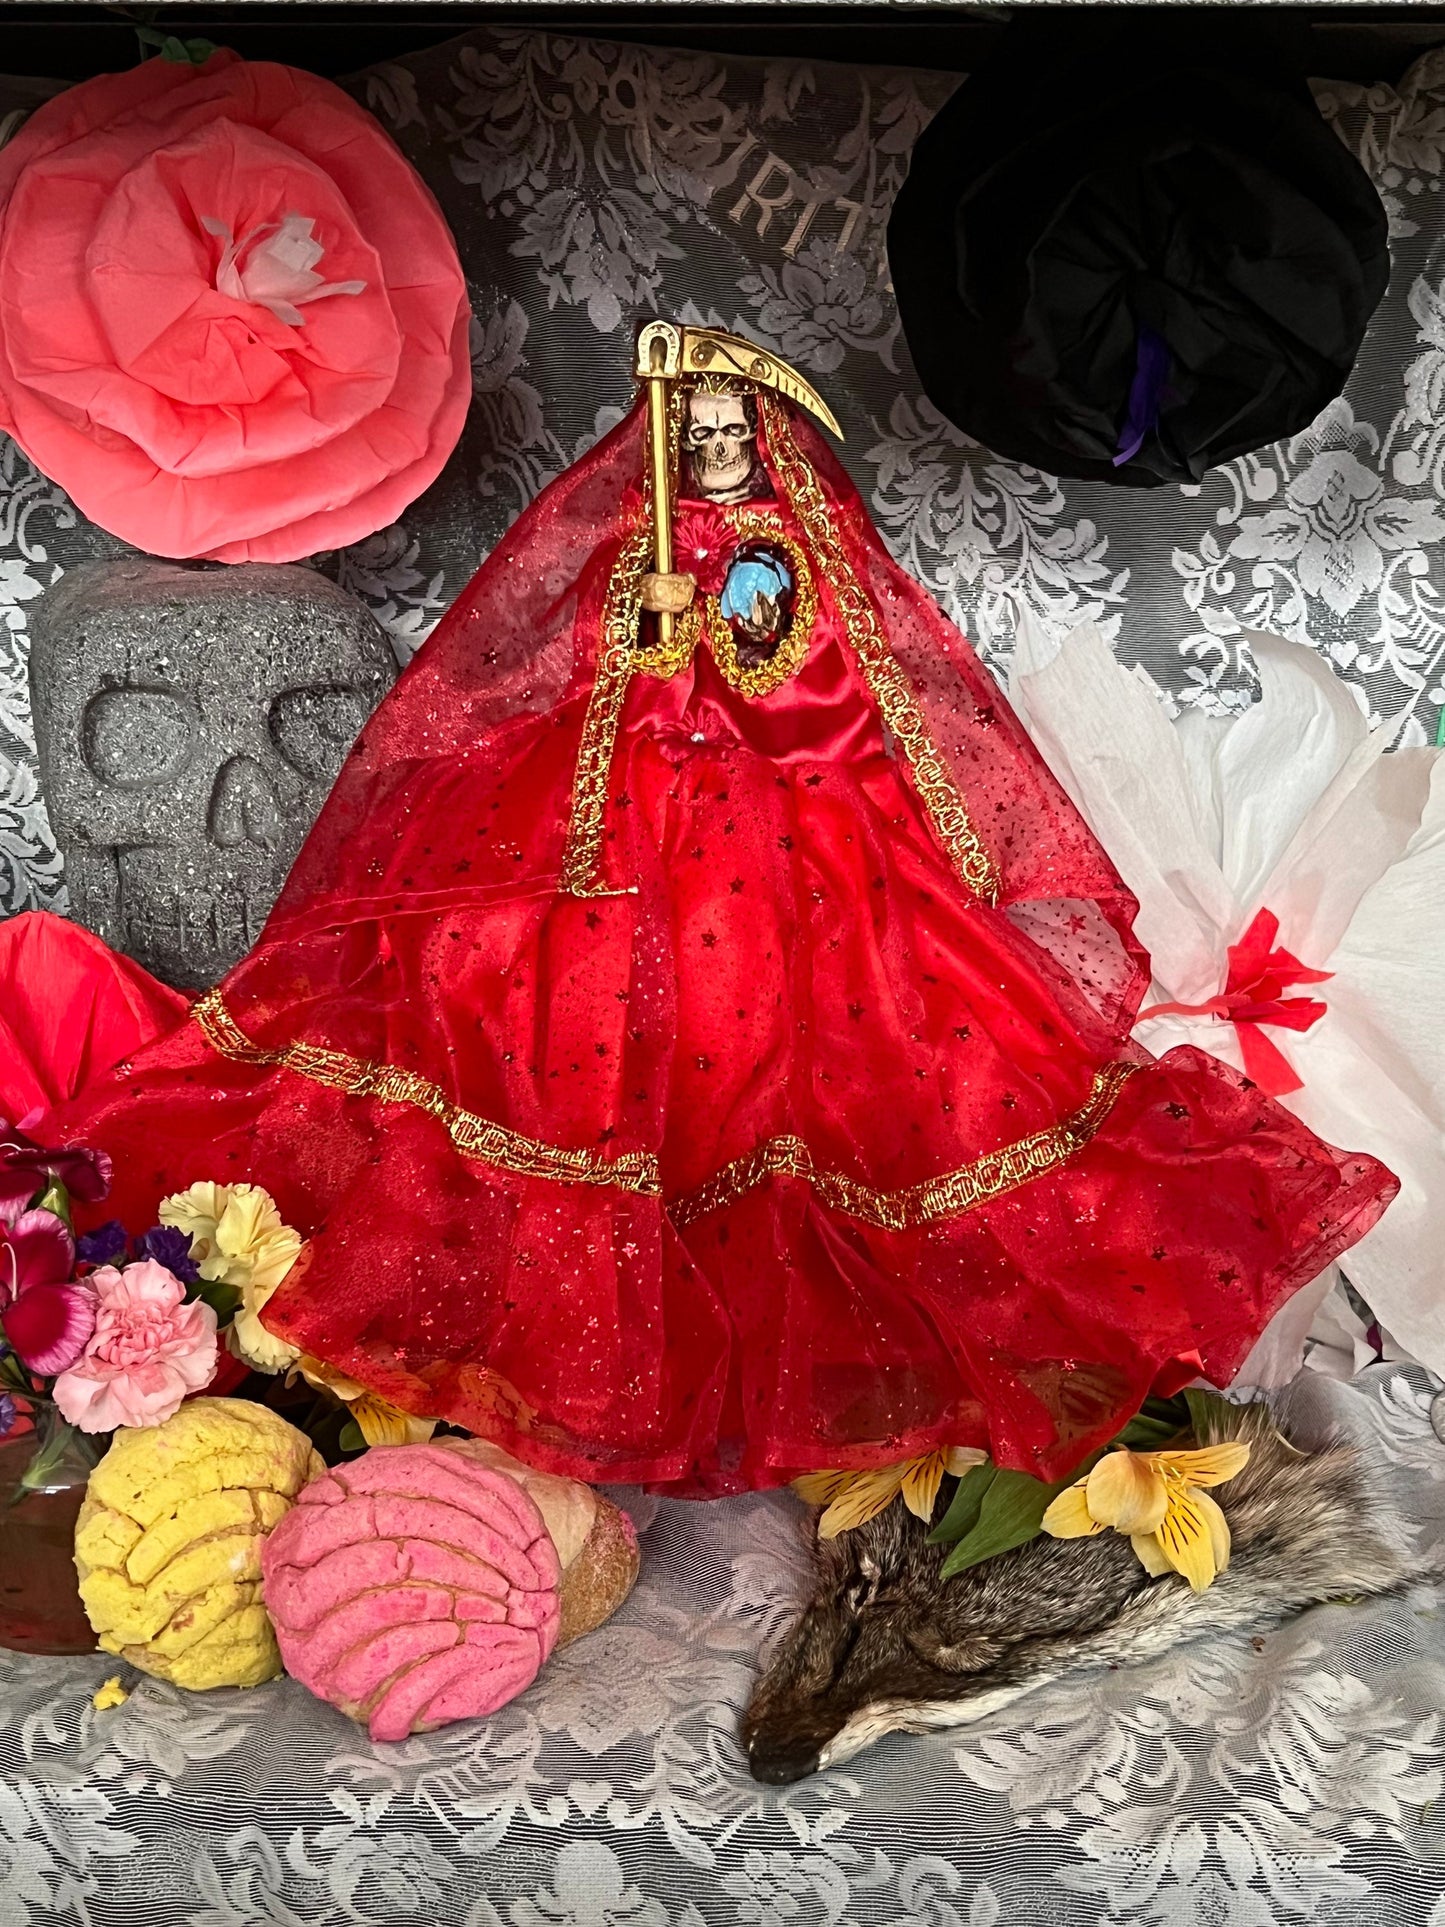 12” Santa Muerte Roja Statue with Dress + Baptized + Fixed + Made in Mexico + 24K Gold Leaf on Scythe